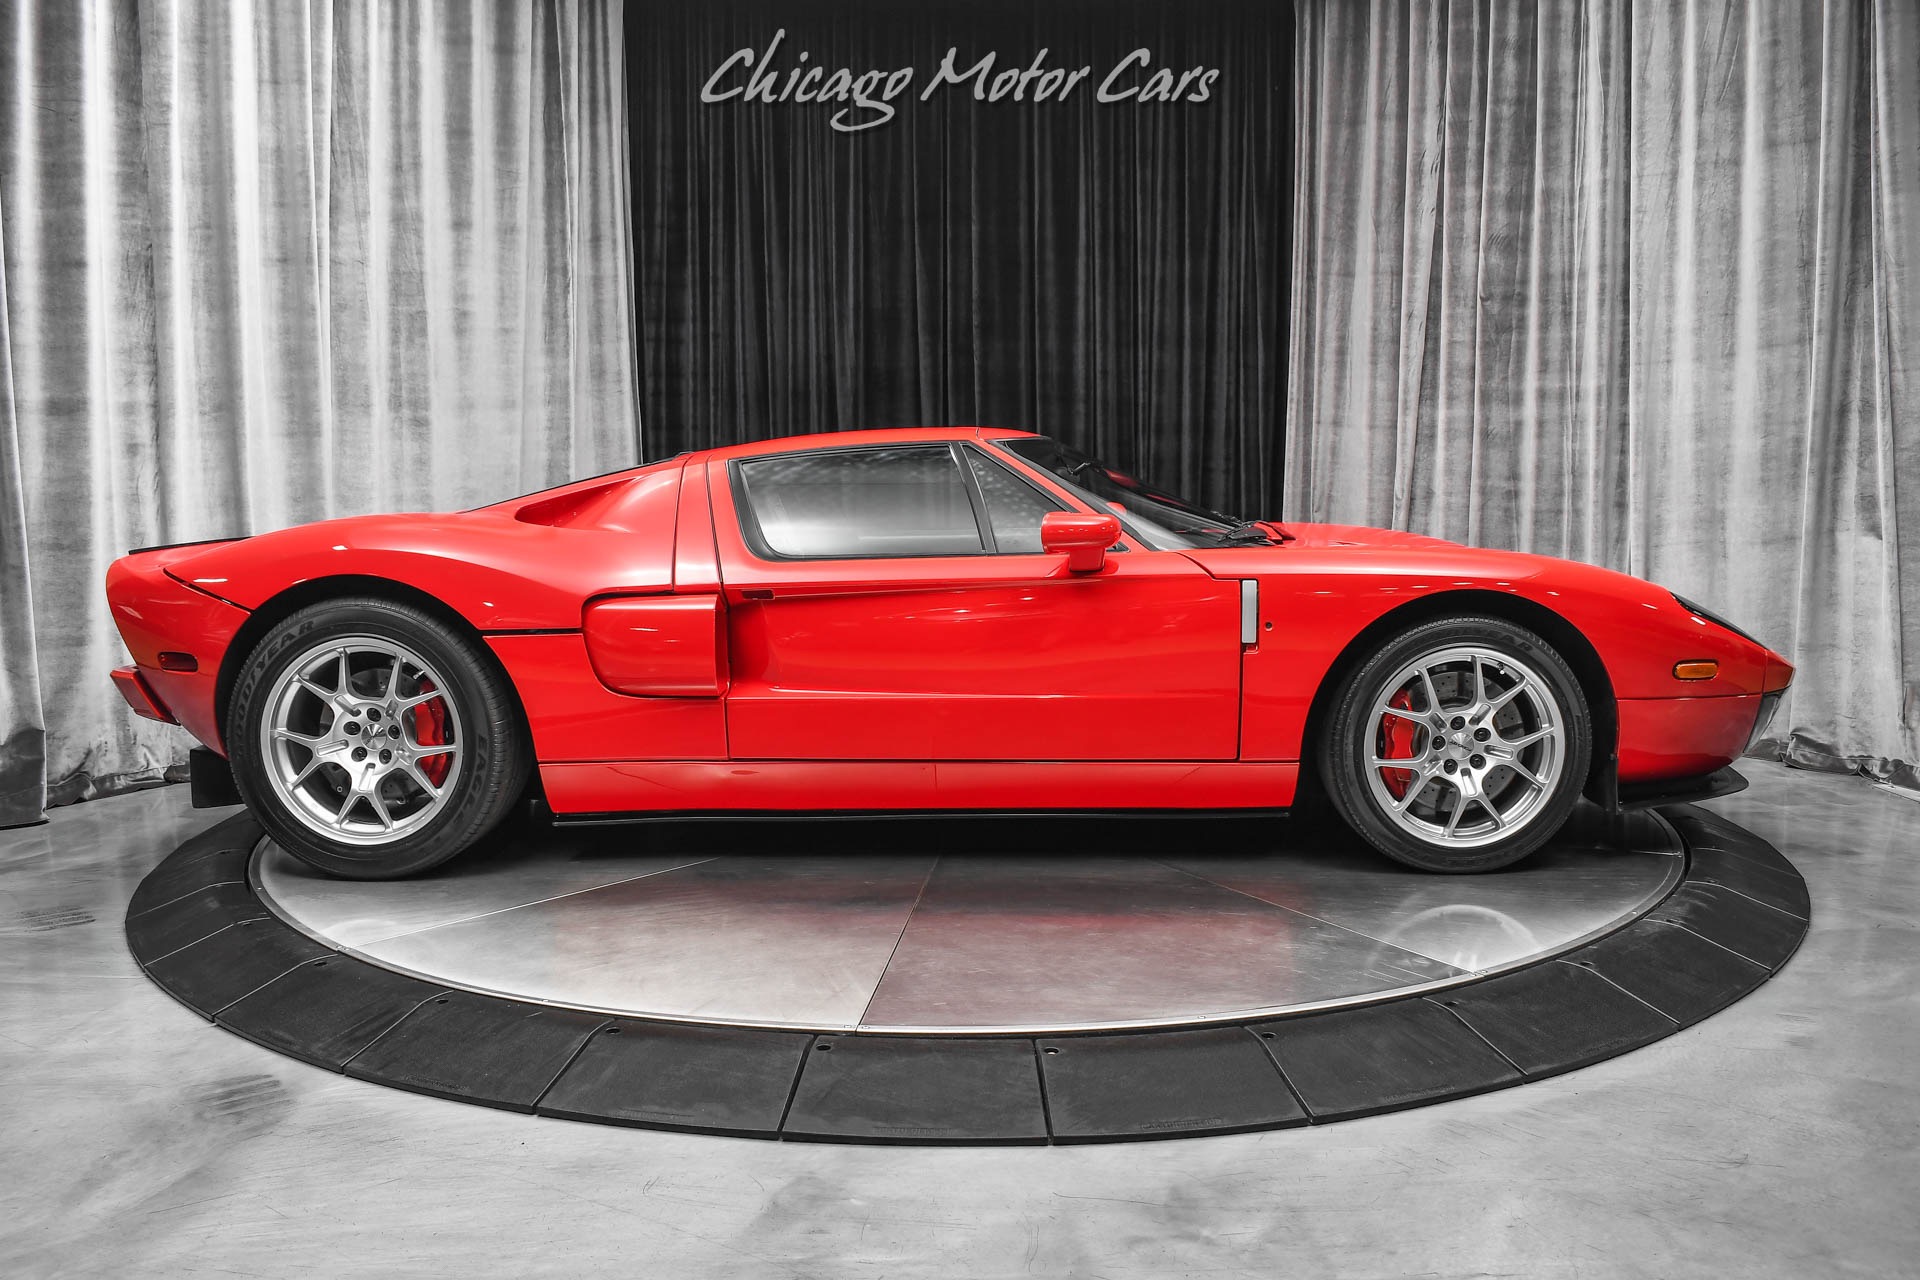 Used-2005-Ford-GT-Stripe-Delete-RARE-Serviced-Perfect-Collector-Quality